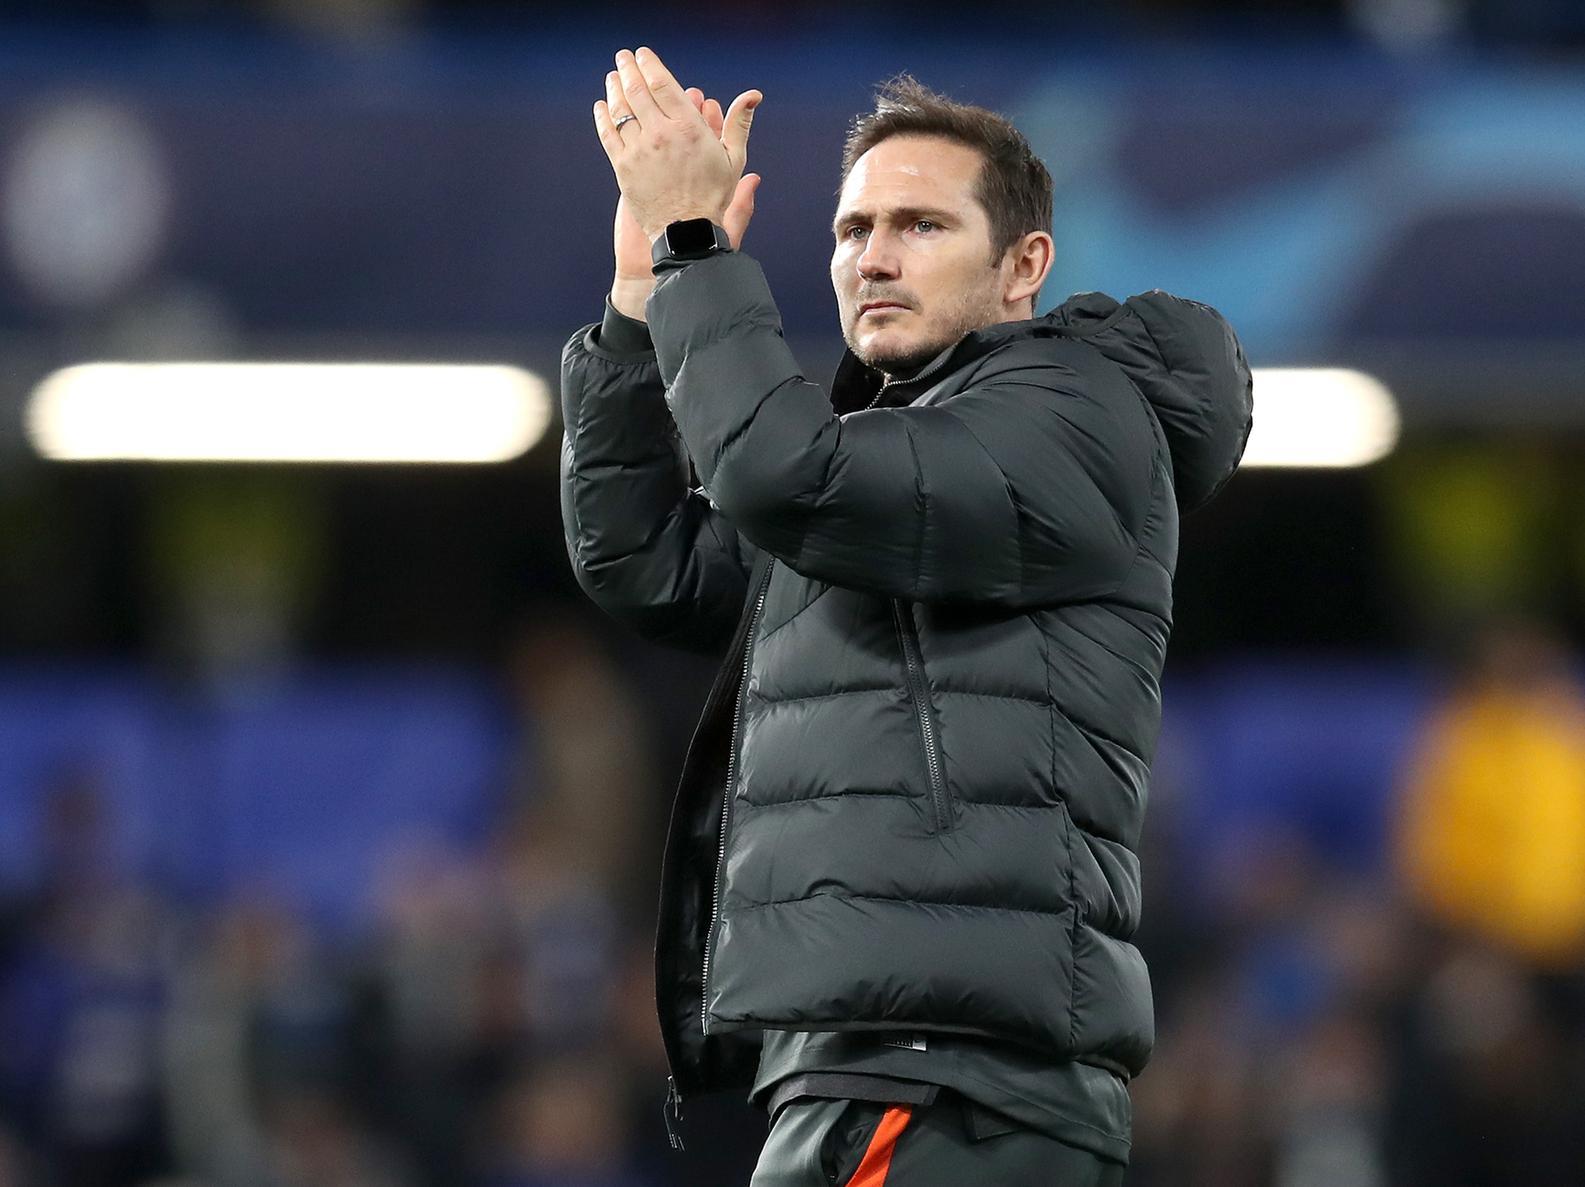 The new Chelsea boss had been the favourite to get the bullet at the start of the campaign, but six Premier League wins on the bounce have certainly shifted the odds in his favour.